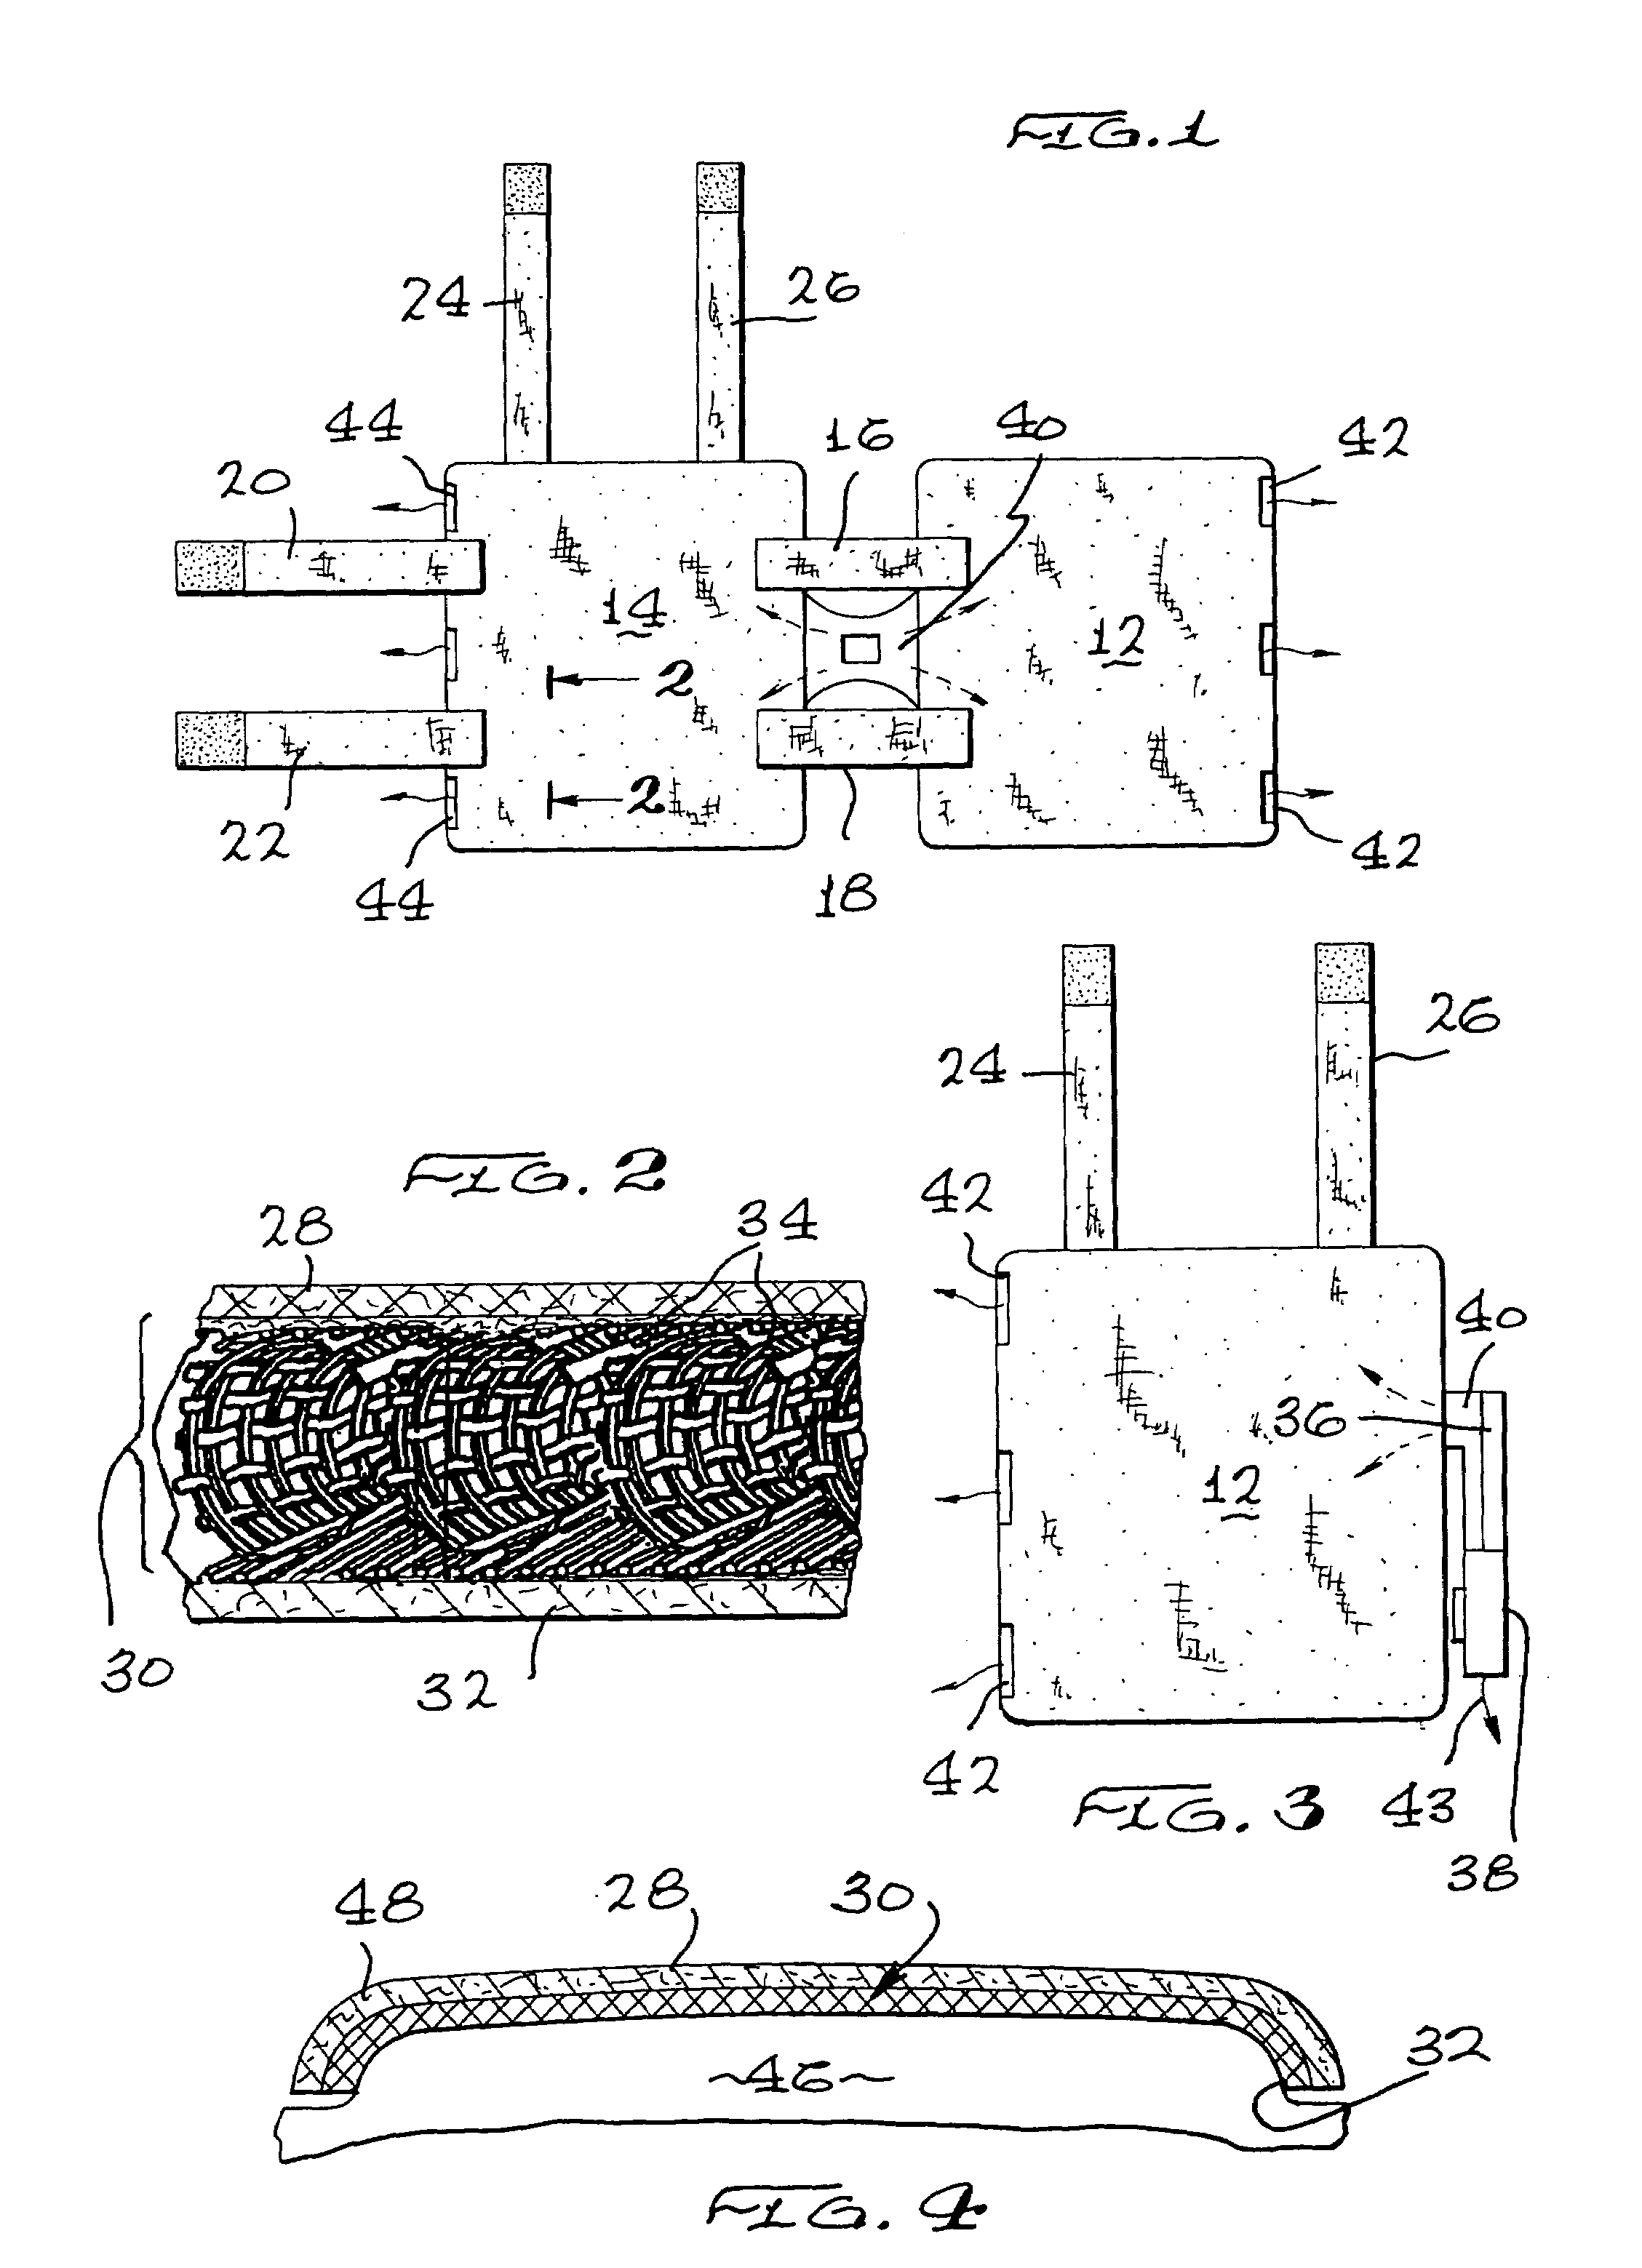 Temperature conditioning apparatus for the trunk of a human body